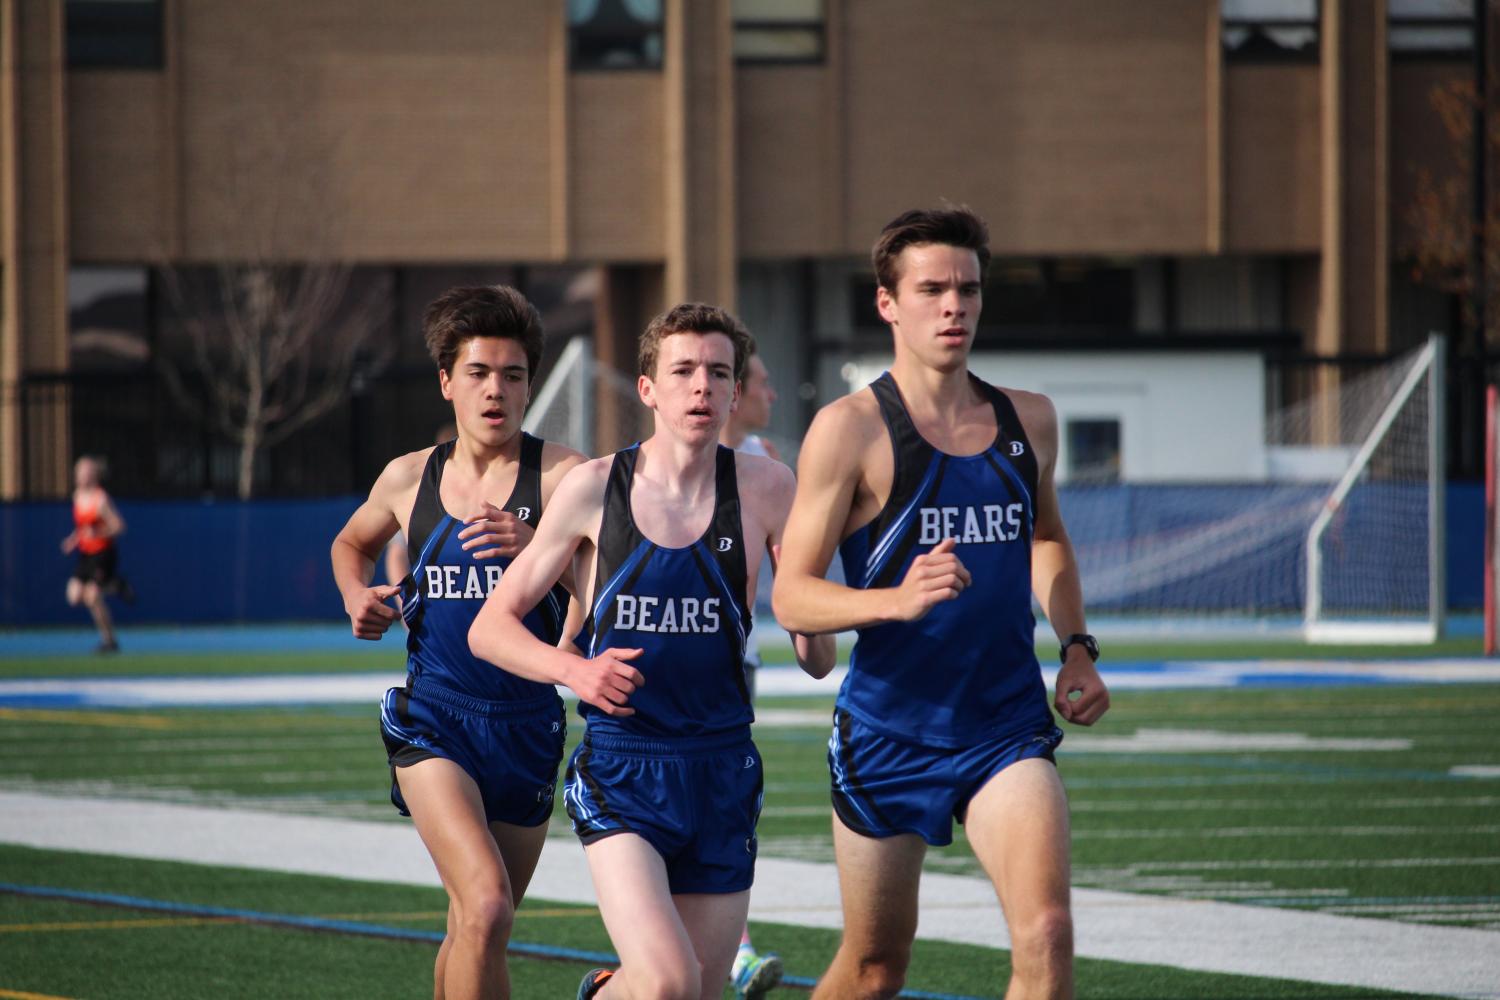 Runners (from right to left) Brian Grifftih, Sean Finn, and Drake Heisterkamp race against their competitors